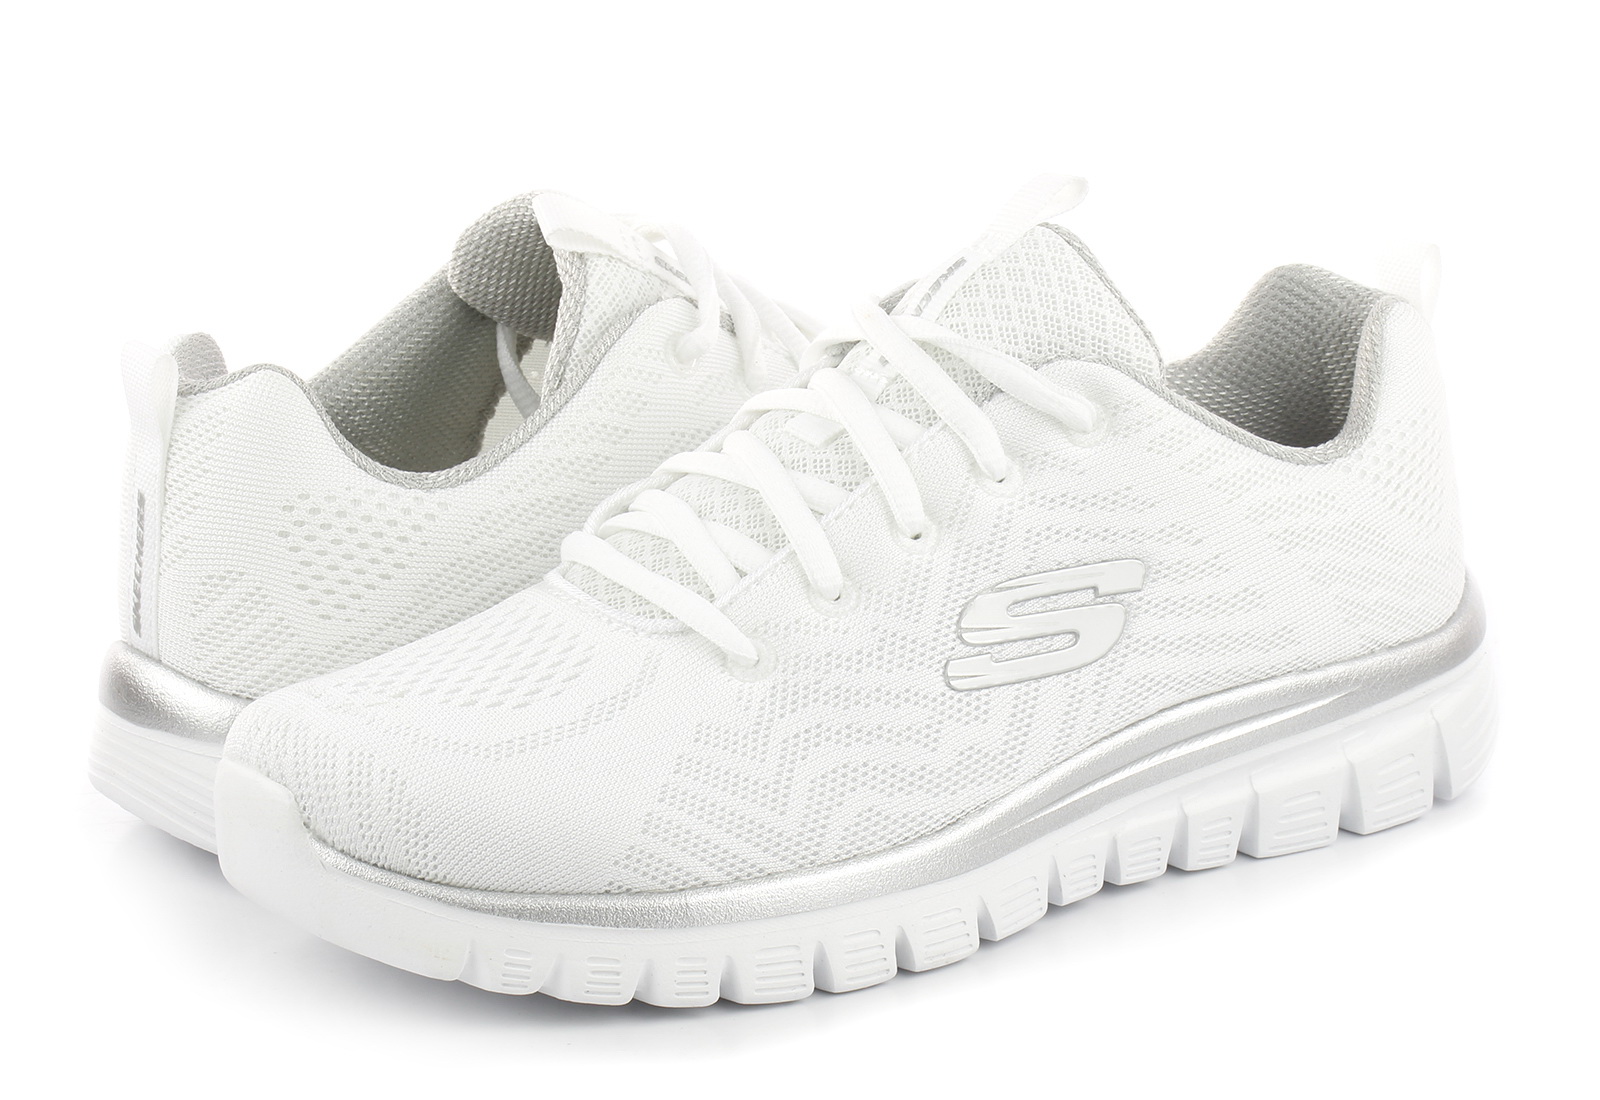 Manto abdomen Efectivamente Skechers Sneakers - Graceful-get Connected - 12615-WSL - Online shop for  sneakers, shoes and boots